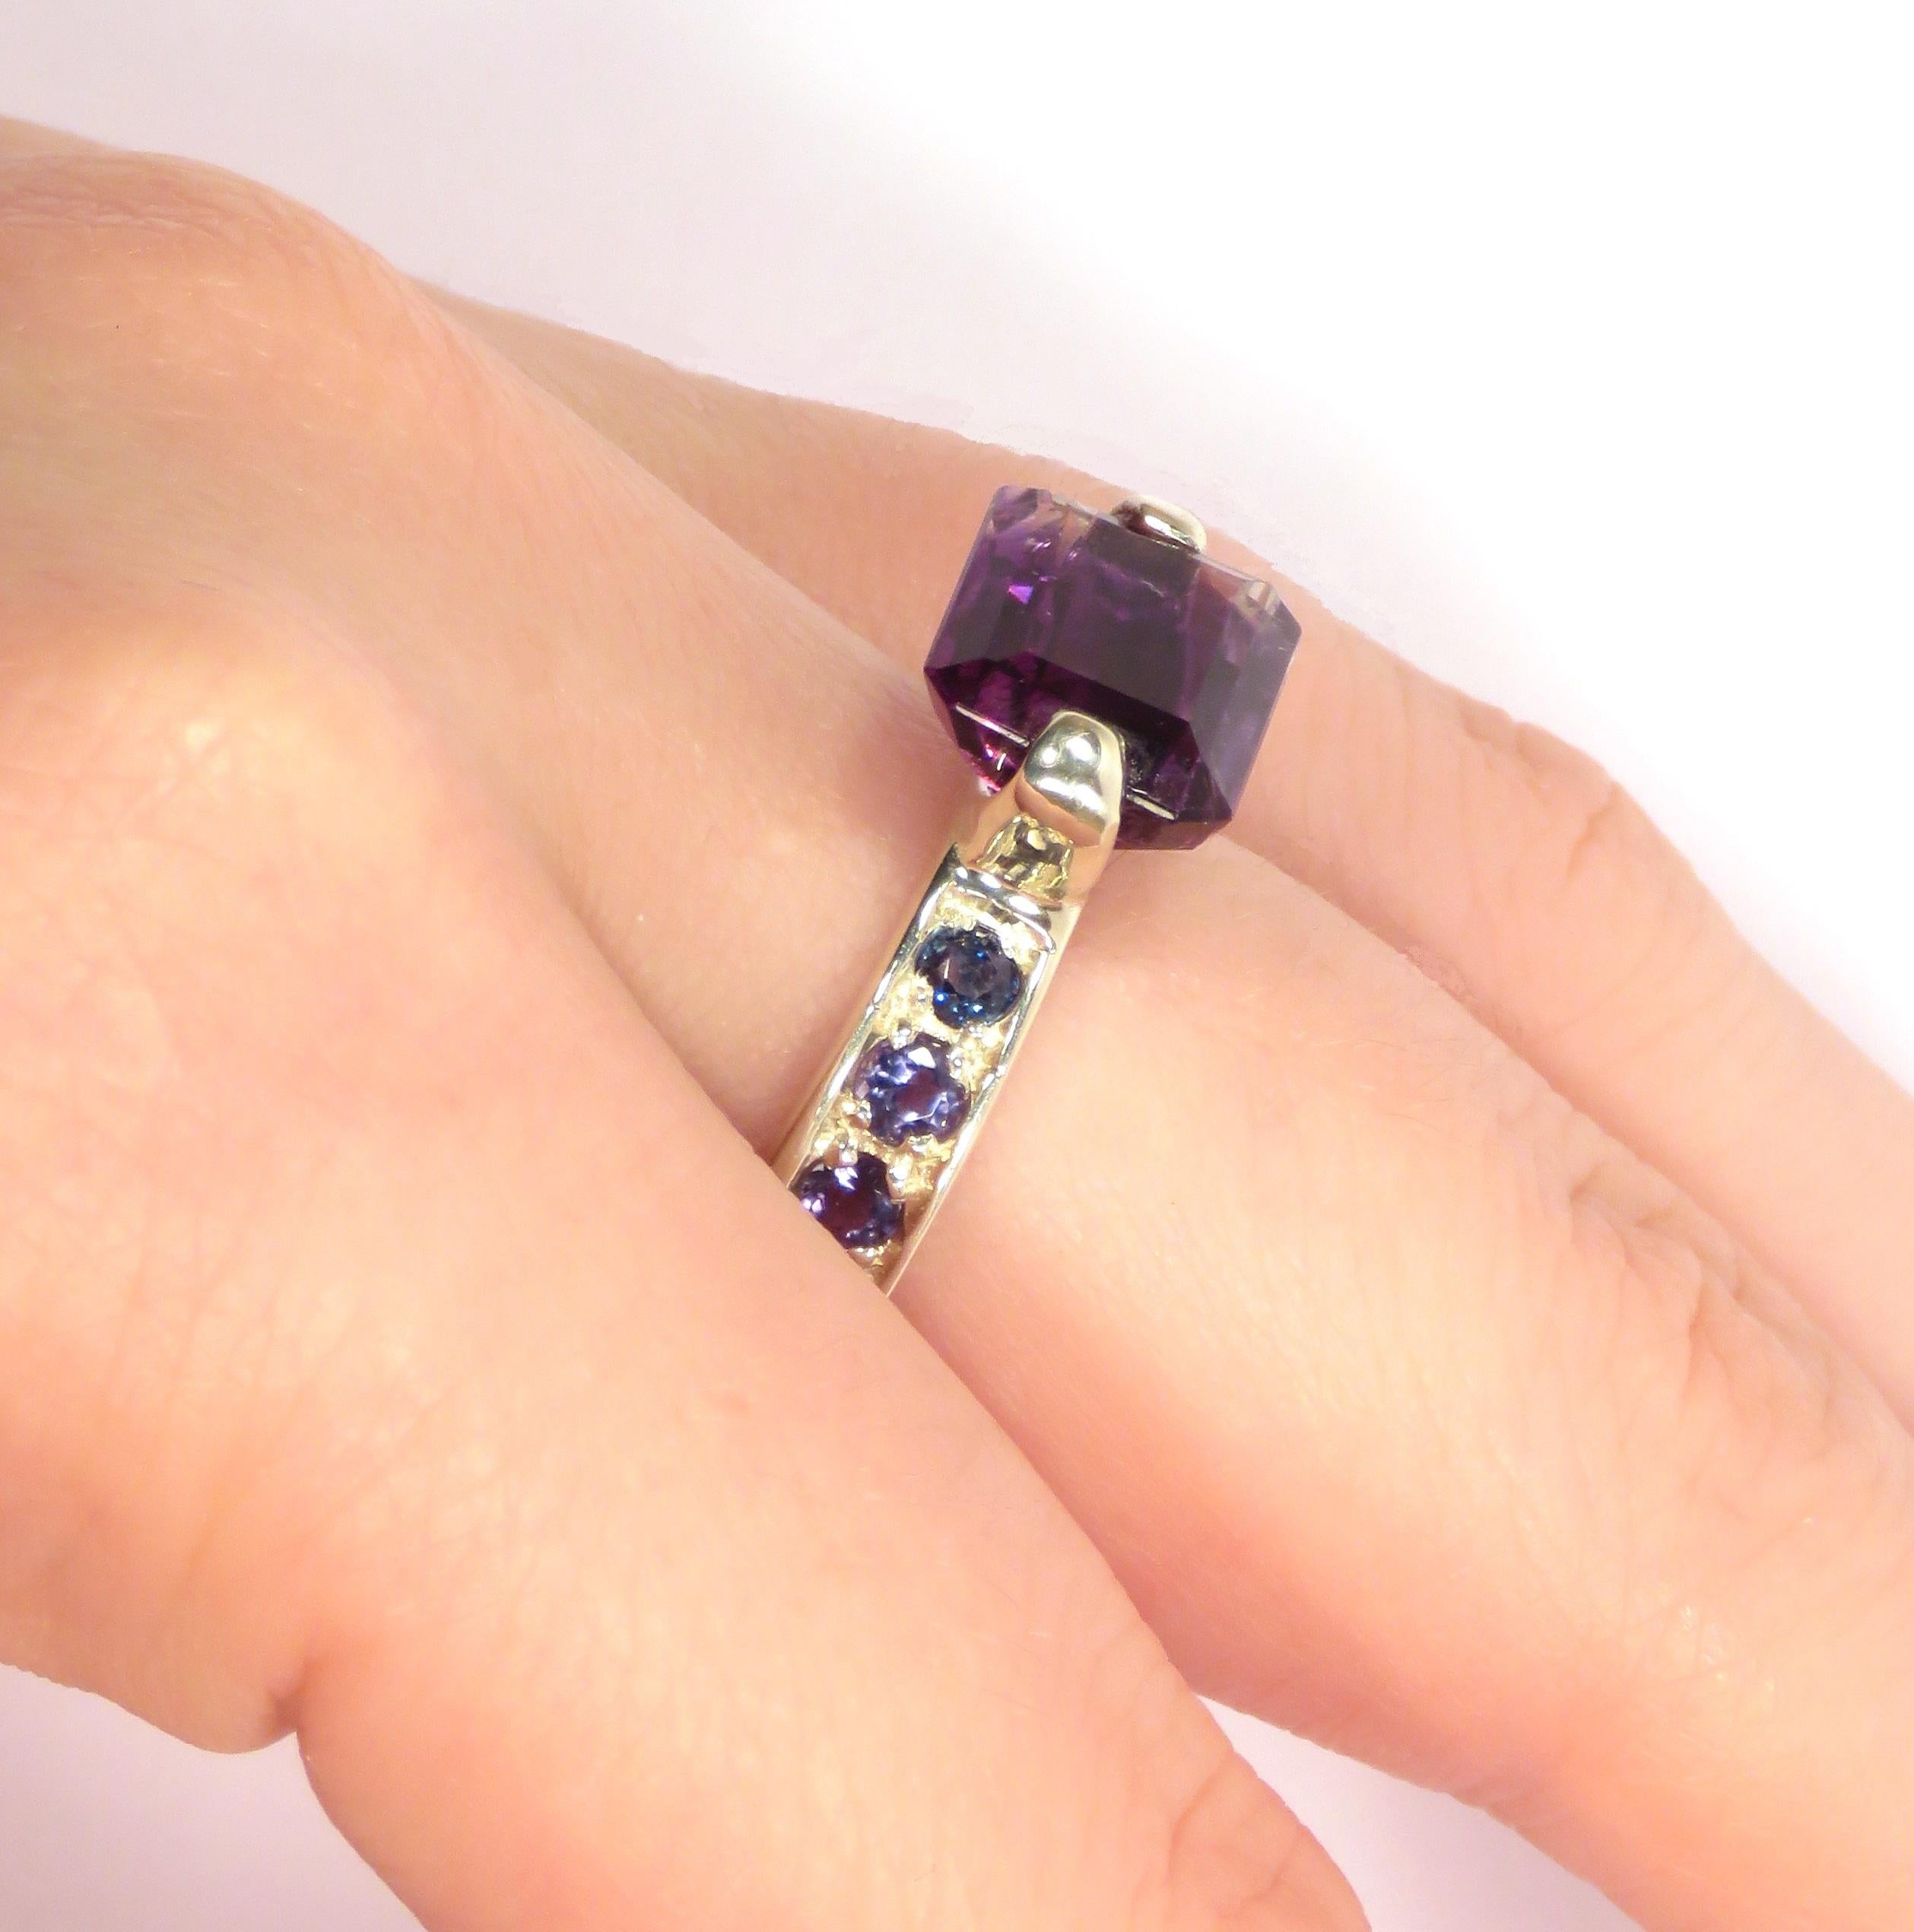 Cocktail ring in 9 karat white gold with a natural amethyst and iolites. US finger size is 6 3/4, French size 53, Italian size 13, it can be resized to the customer's size before shipment. The ring is marked with the Italian Gold Mark 375 and Botta